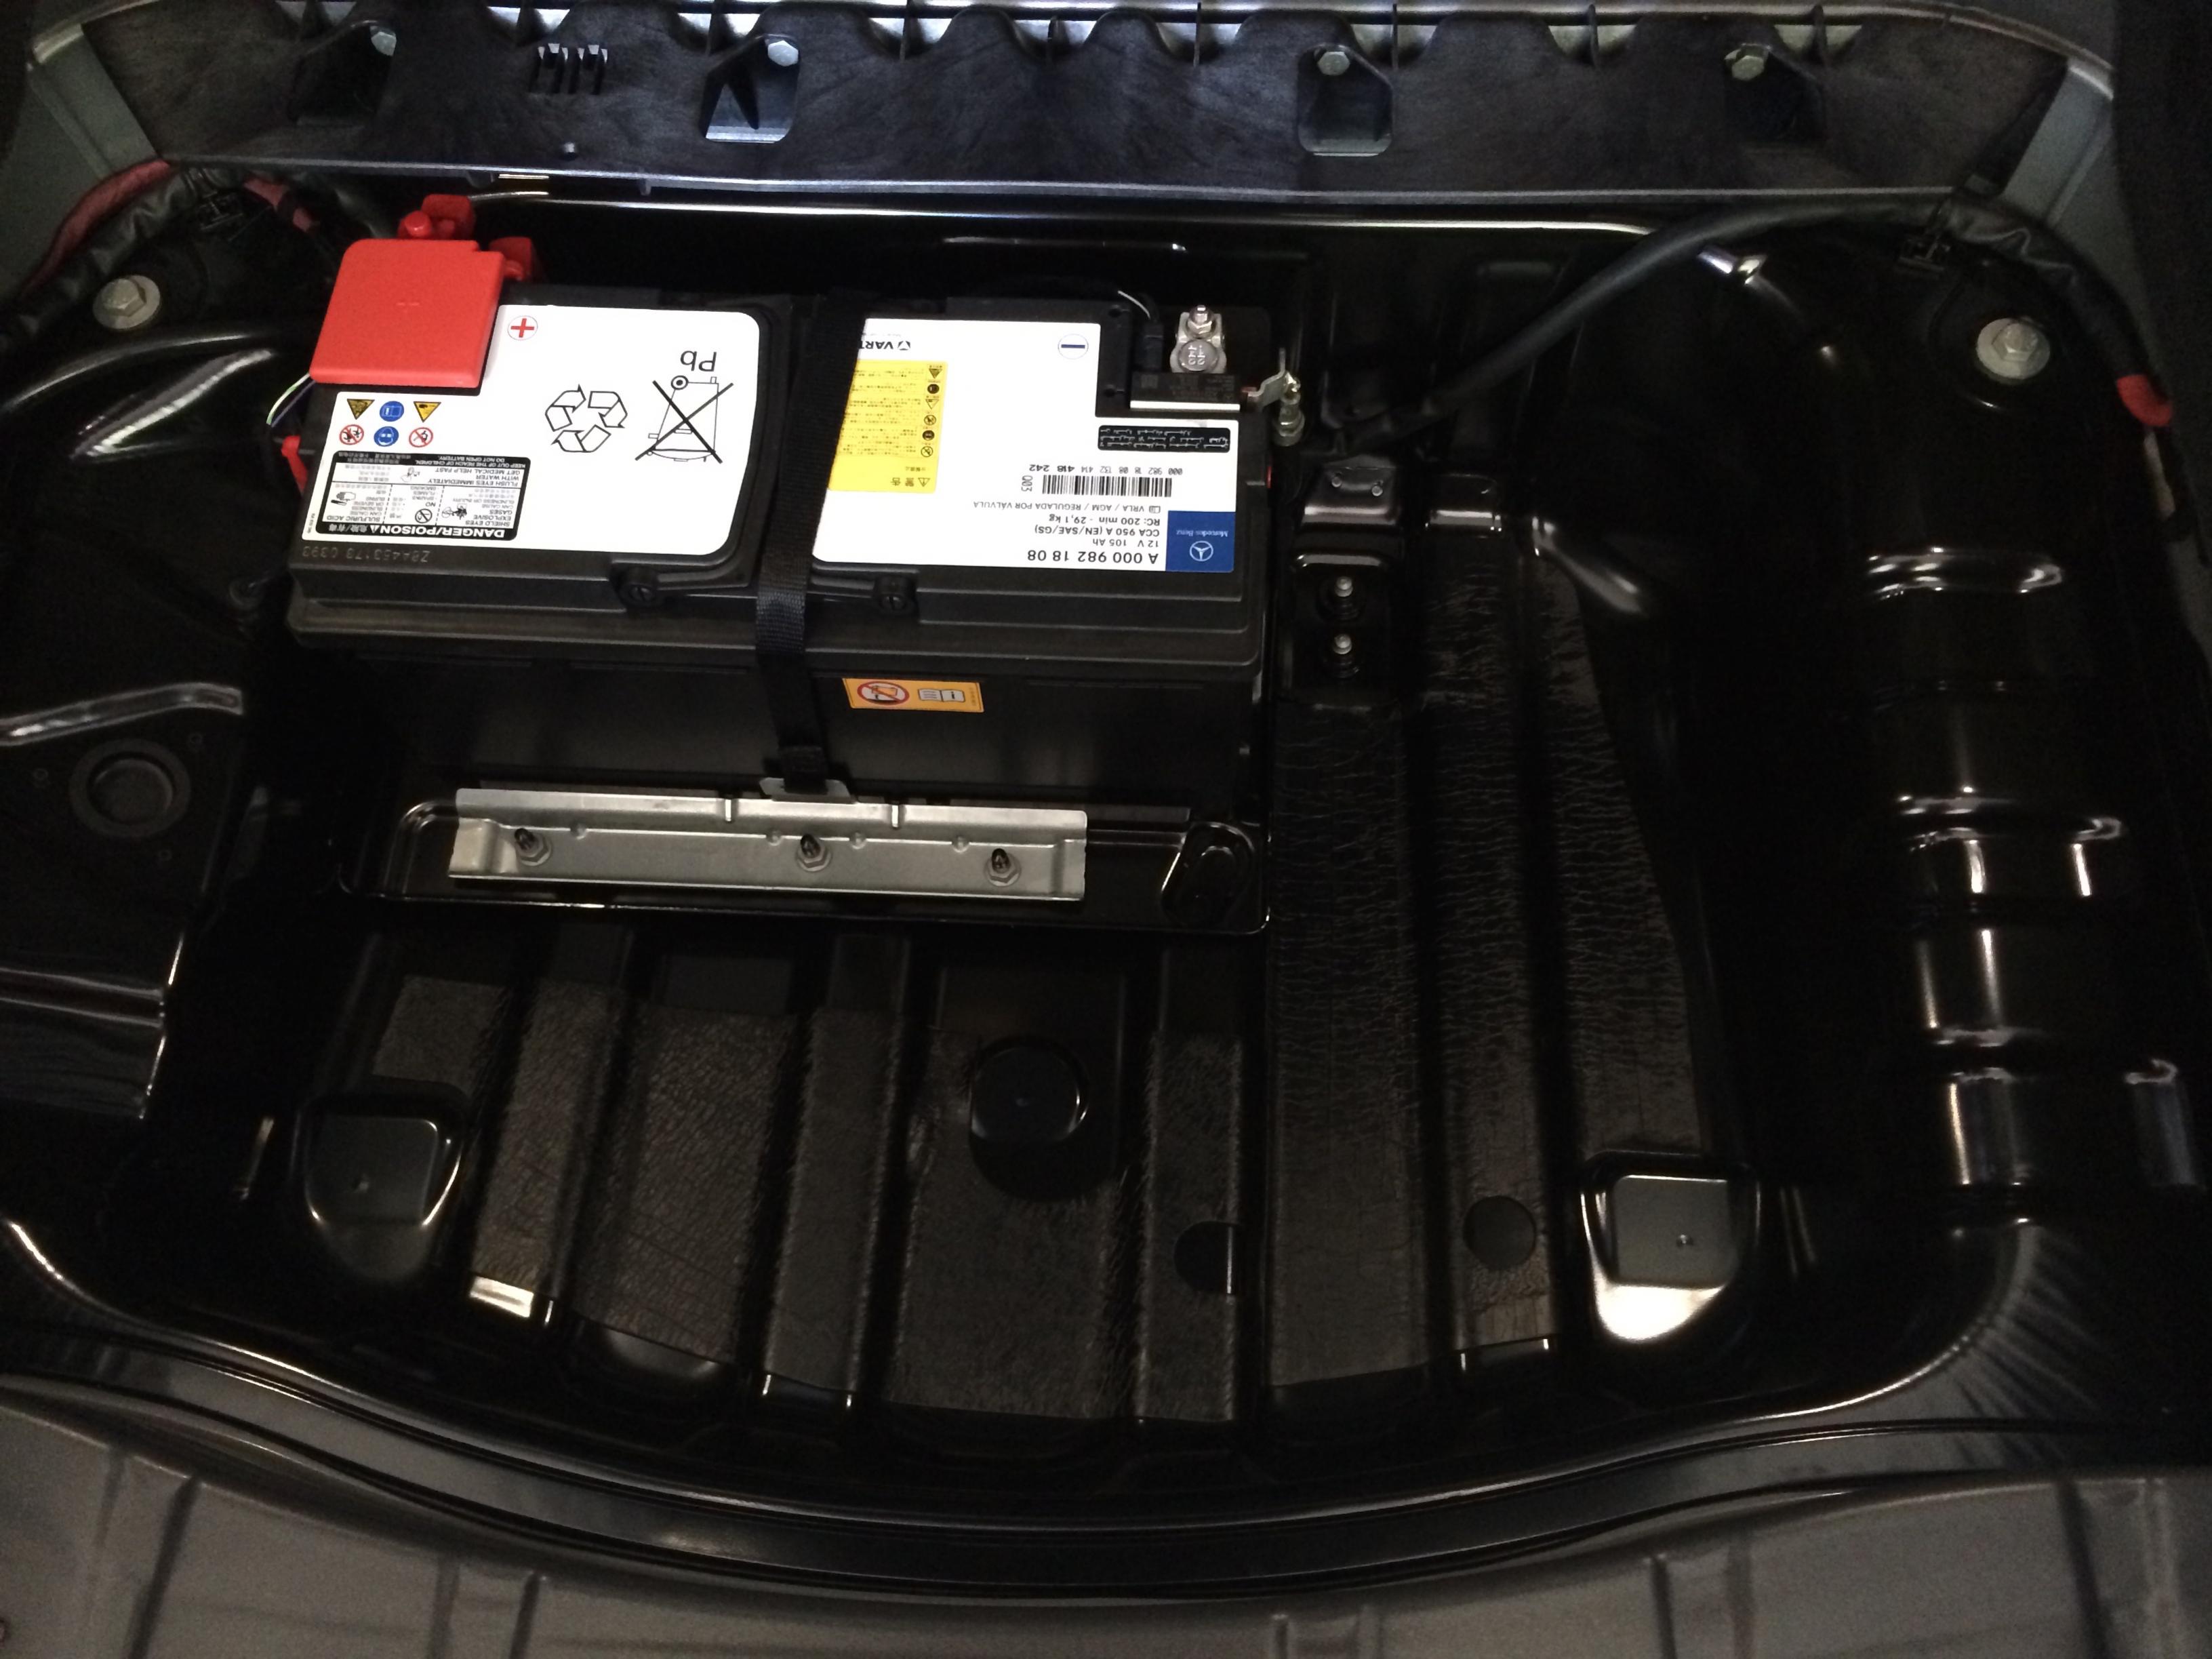 New replacement part# for battery A 000 982 21 08? -  Forums